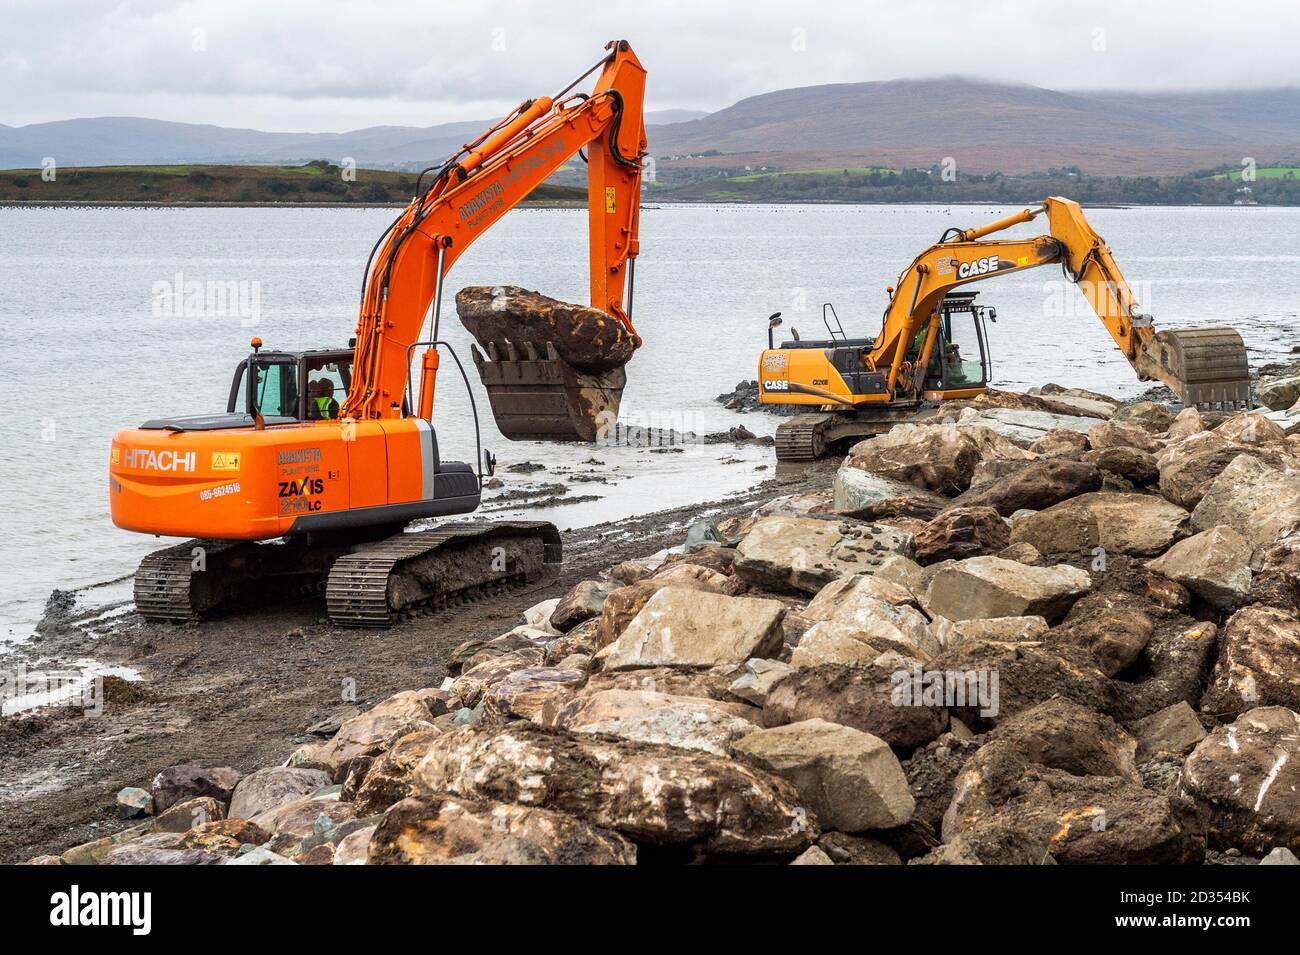 Bantry, West Cork, Ireland. 7th Oct, 2020. Cork County Council has signed off on repairs to the sea wall on the Beicin Walkway in Bantry after parts of the wall started to crumble away in the recent bad weather. Tracked diggers are placing heavy rocks on the beach in an attempt to prevent further corrosion to the popular walkway. Credit: AG News/Alamy Live News Stock Photo